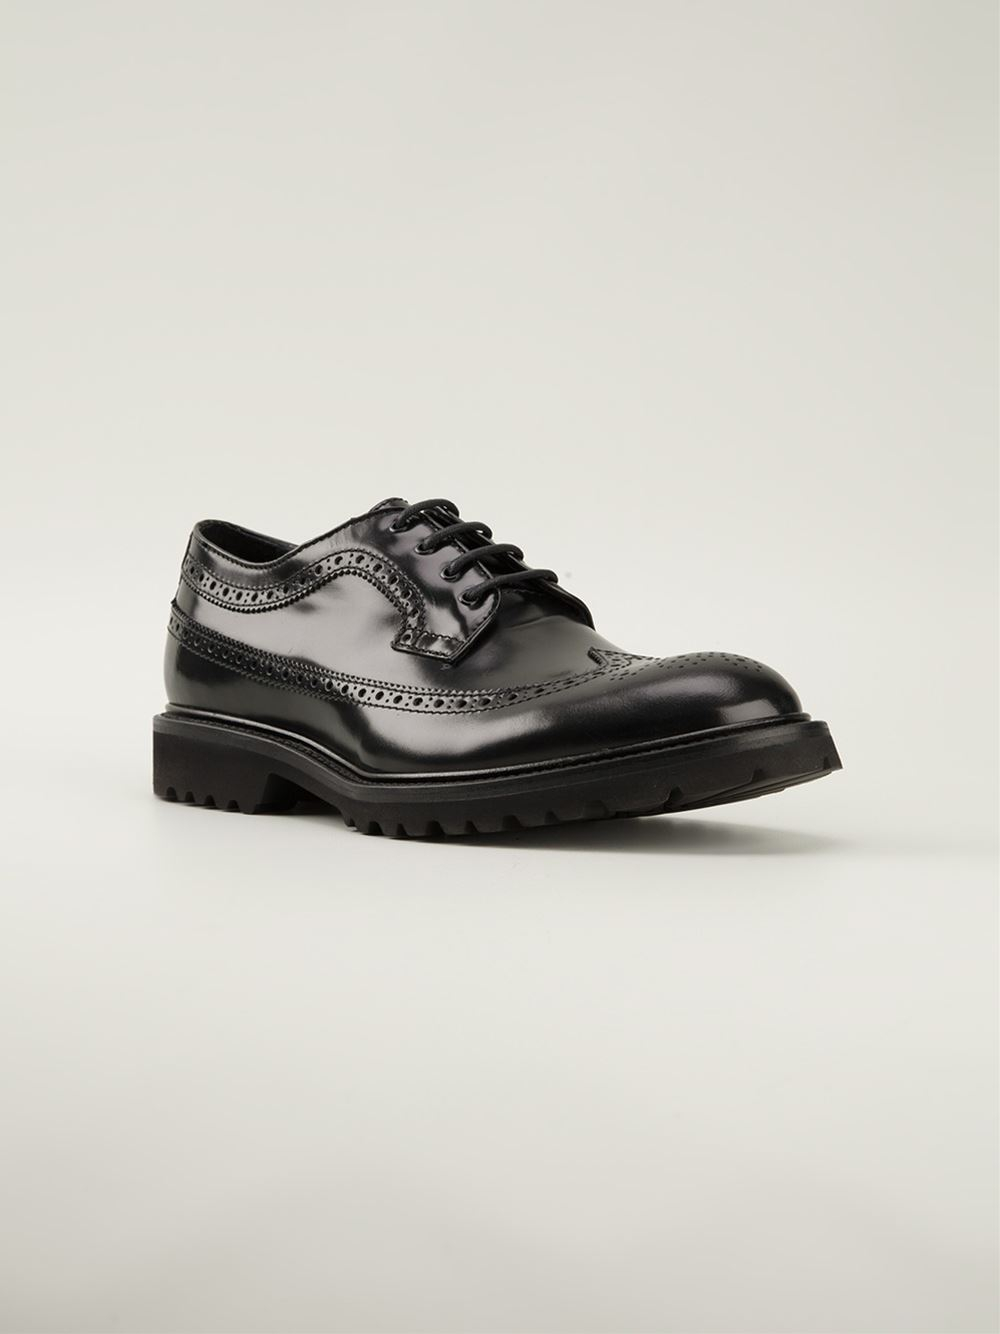 Lyst - Dsquared² Chunky Brogues in Black for Men